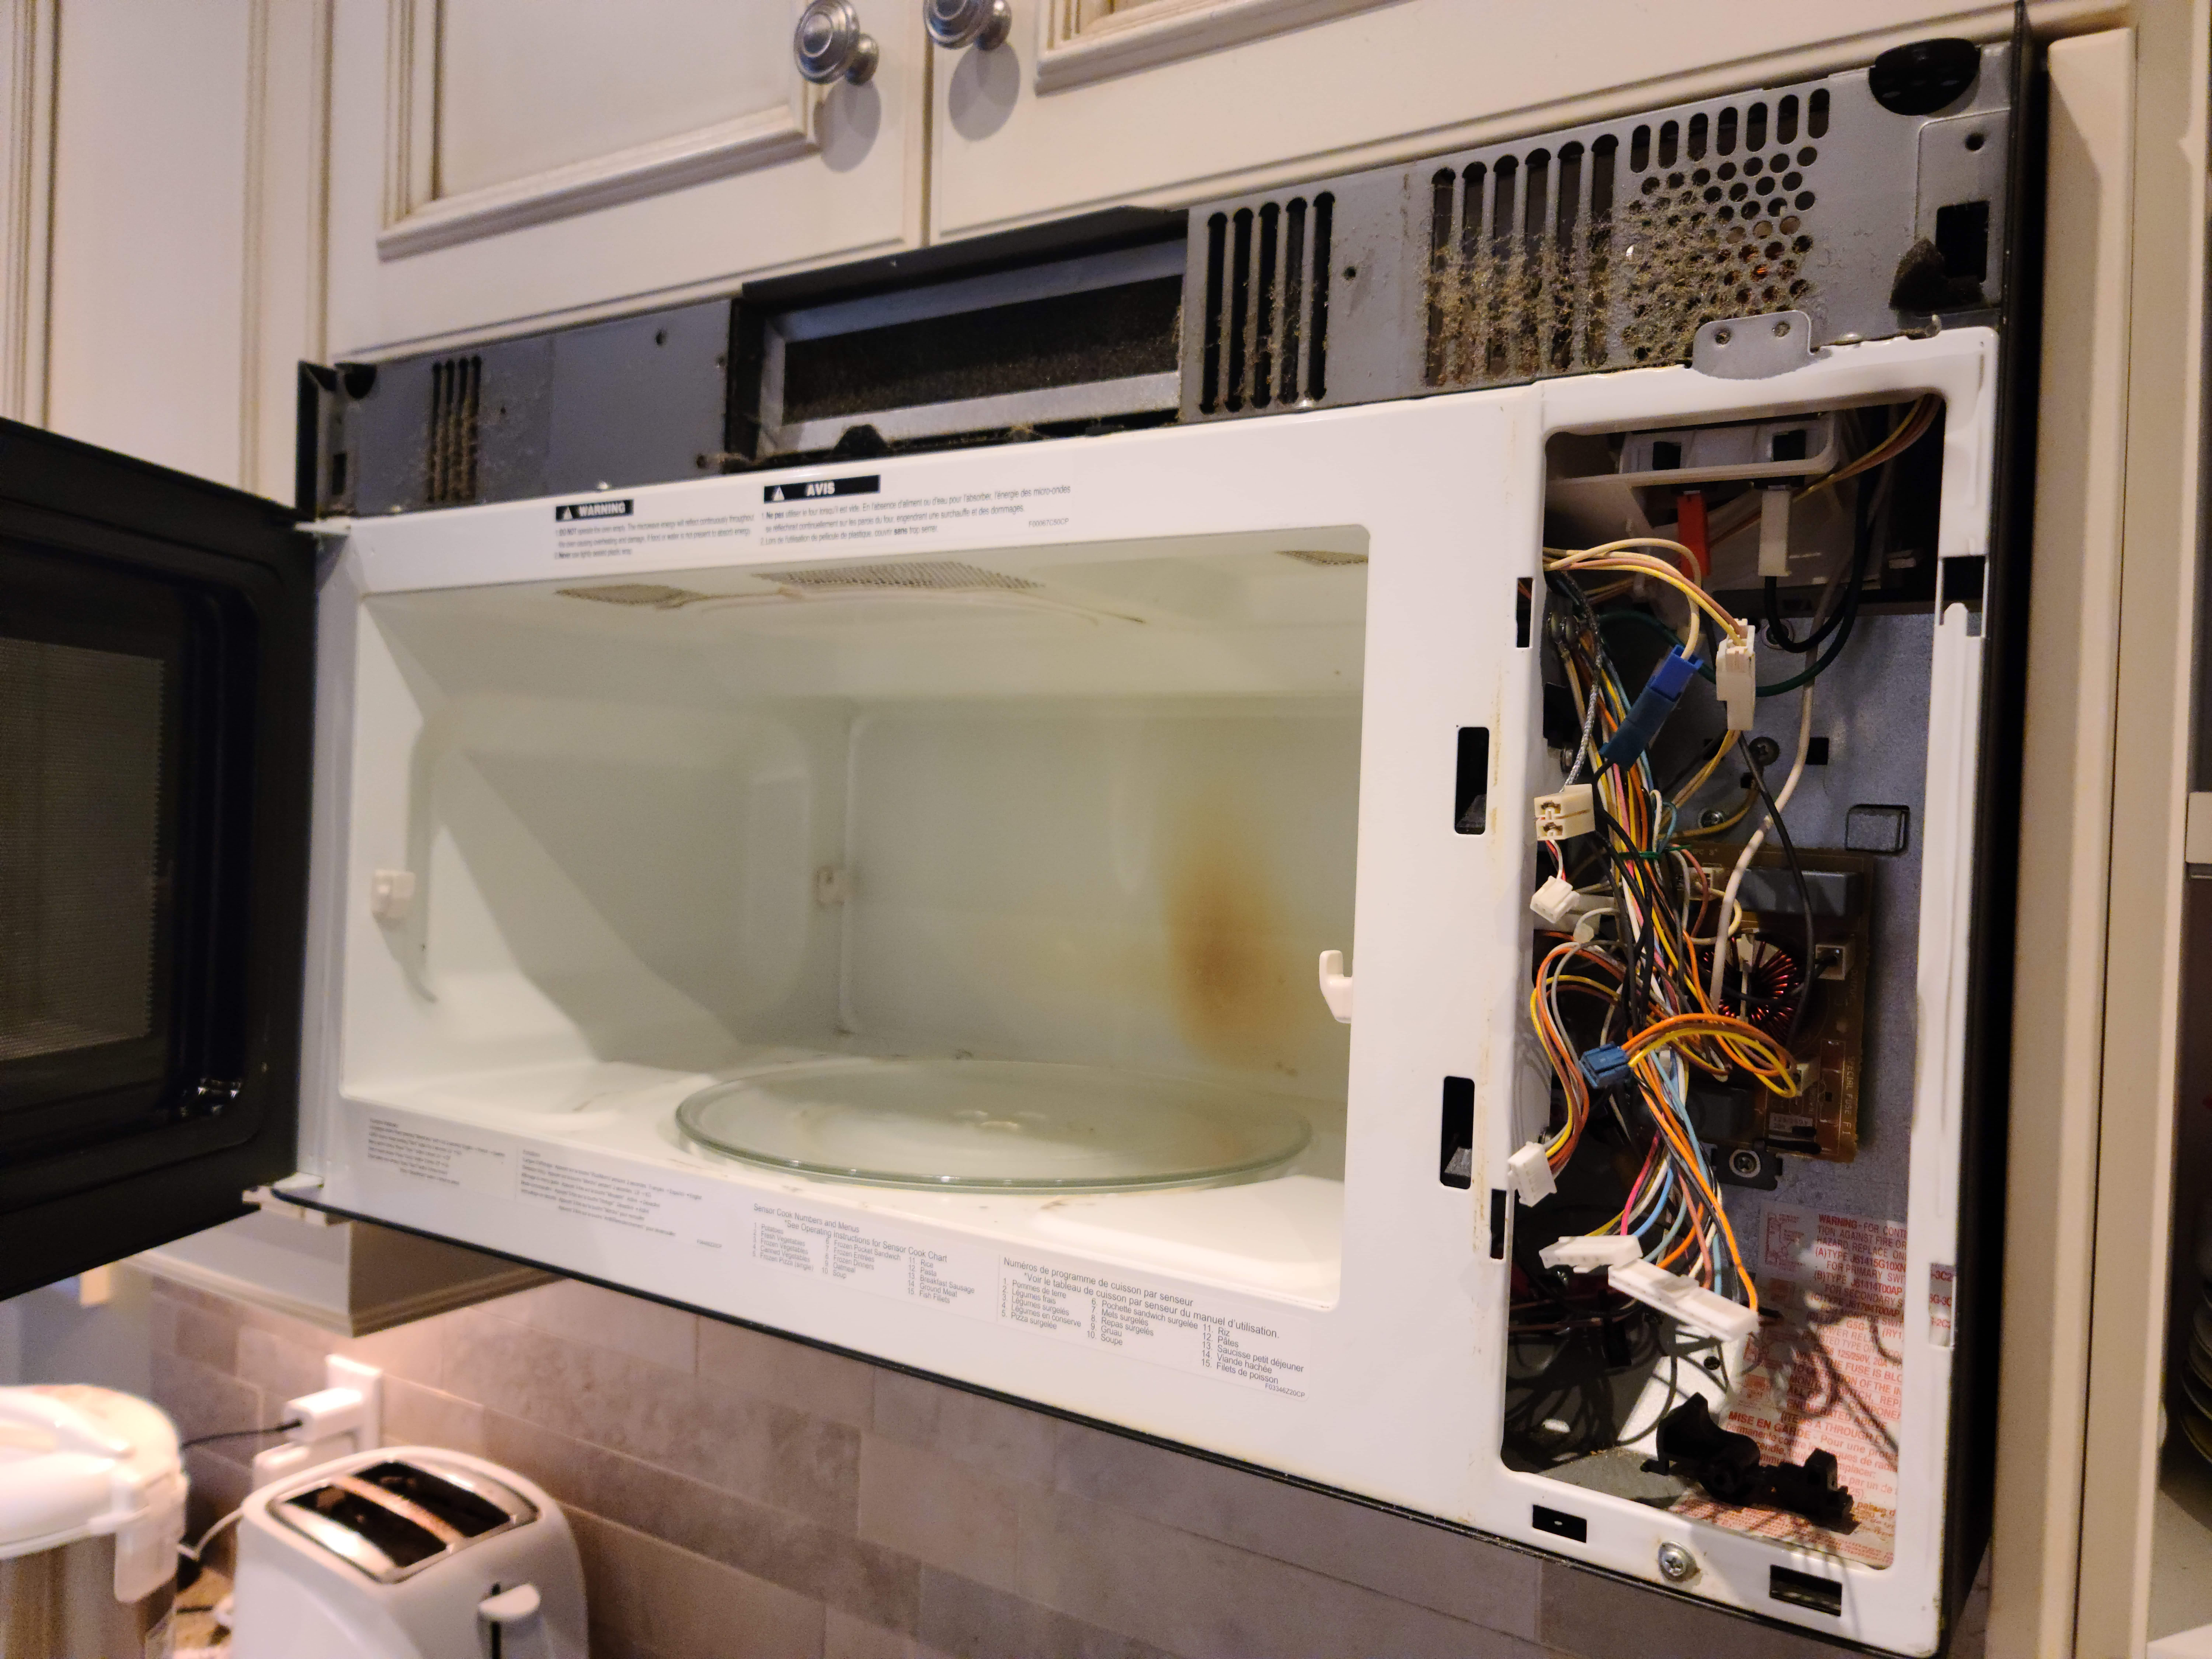 PROLONG THE APPLIANCES LIFE WITH THESE CAREFUL TIPS Canada Appliance Repair